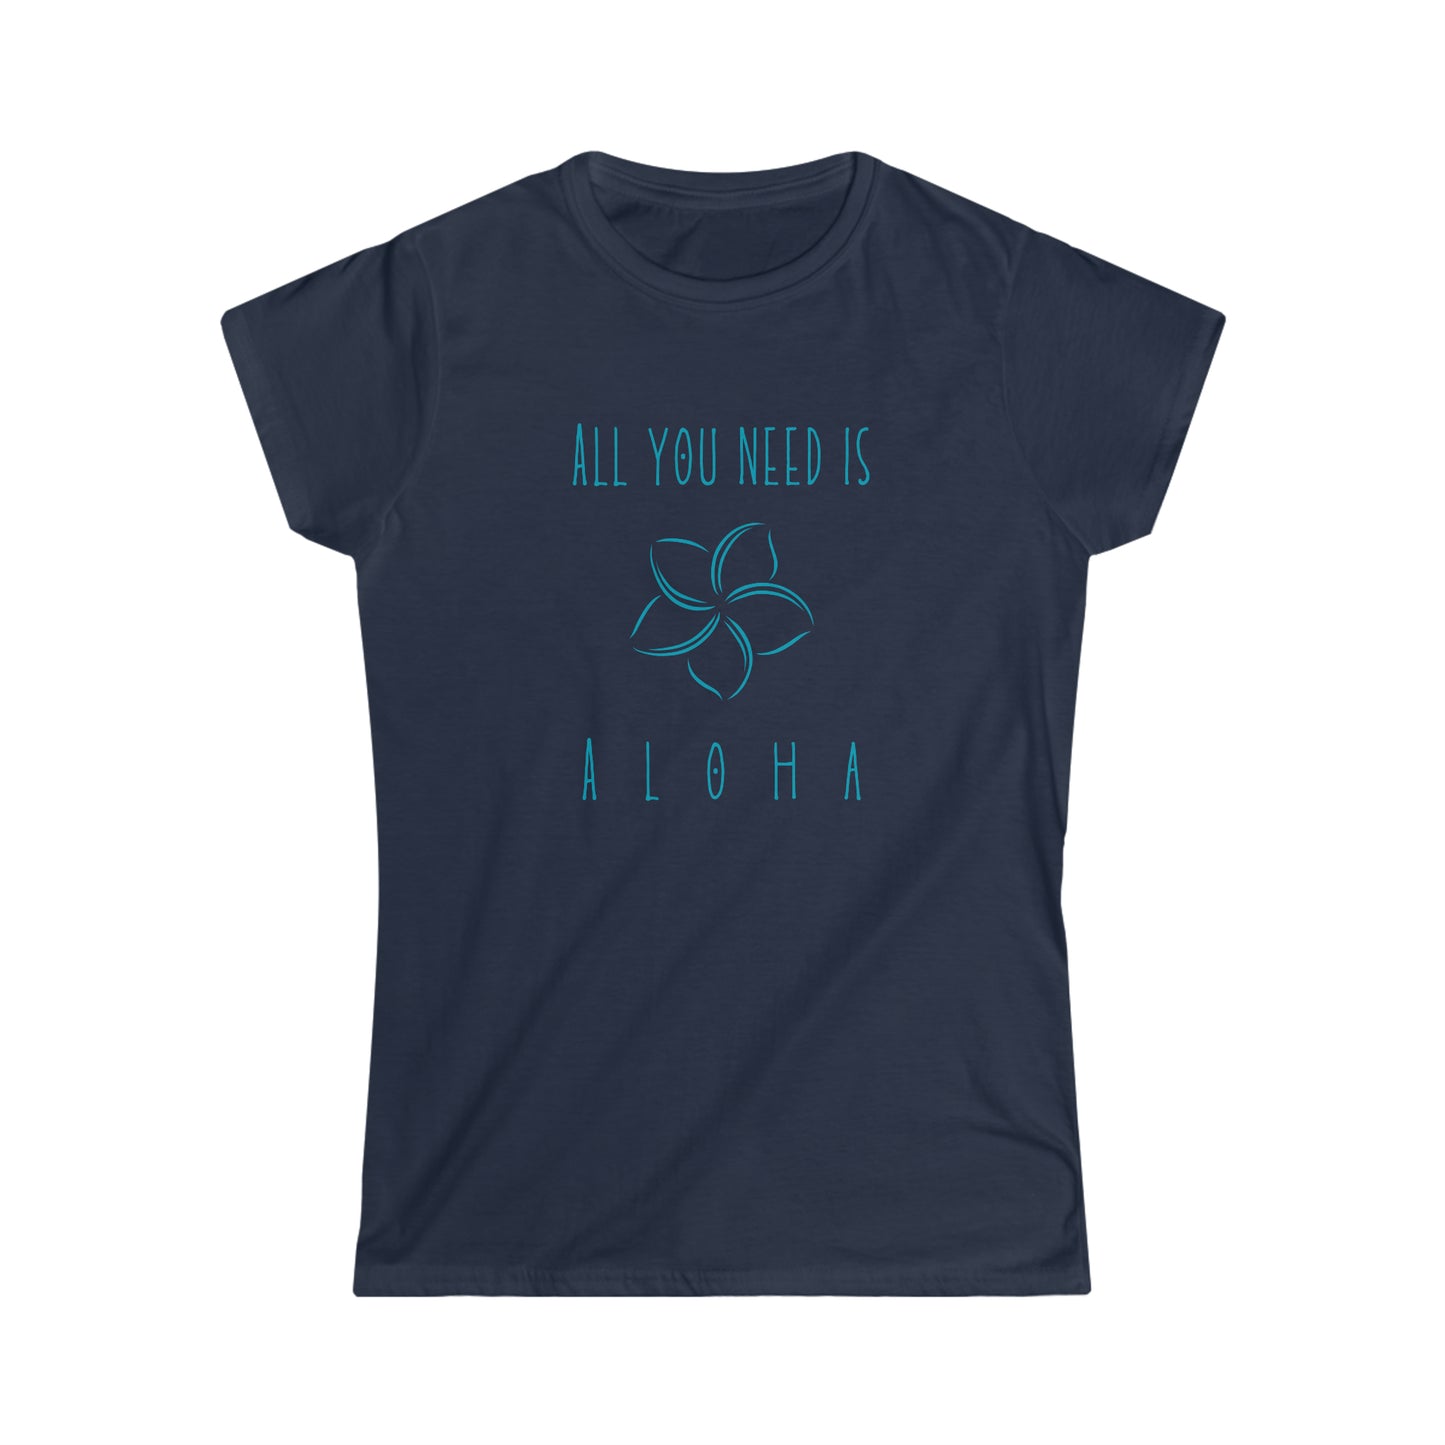 All you need is Aloha Blue Print Women's Softstyle Tee in 3 colors